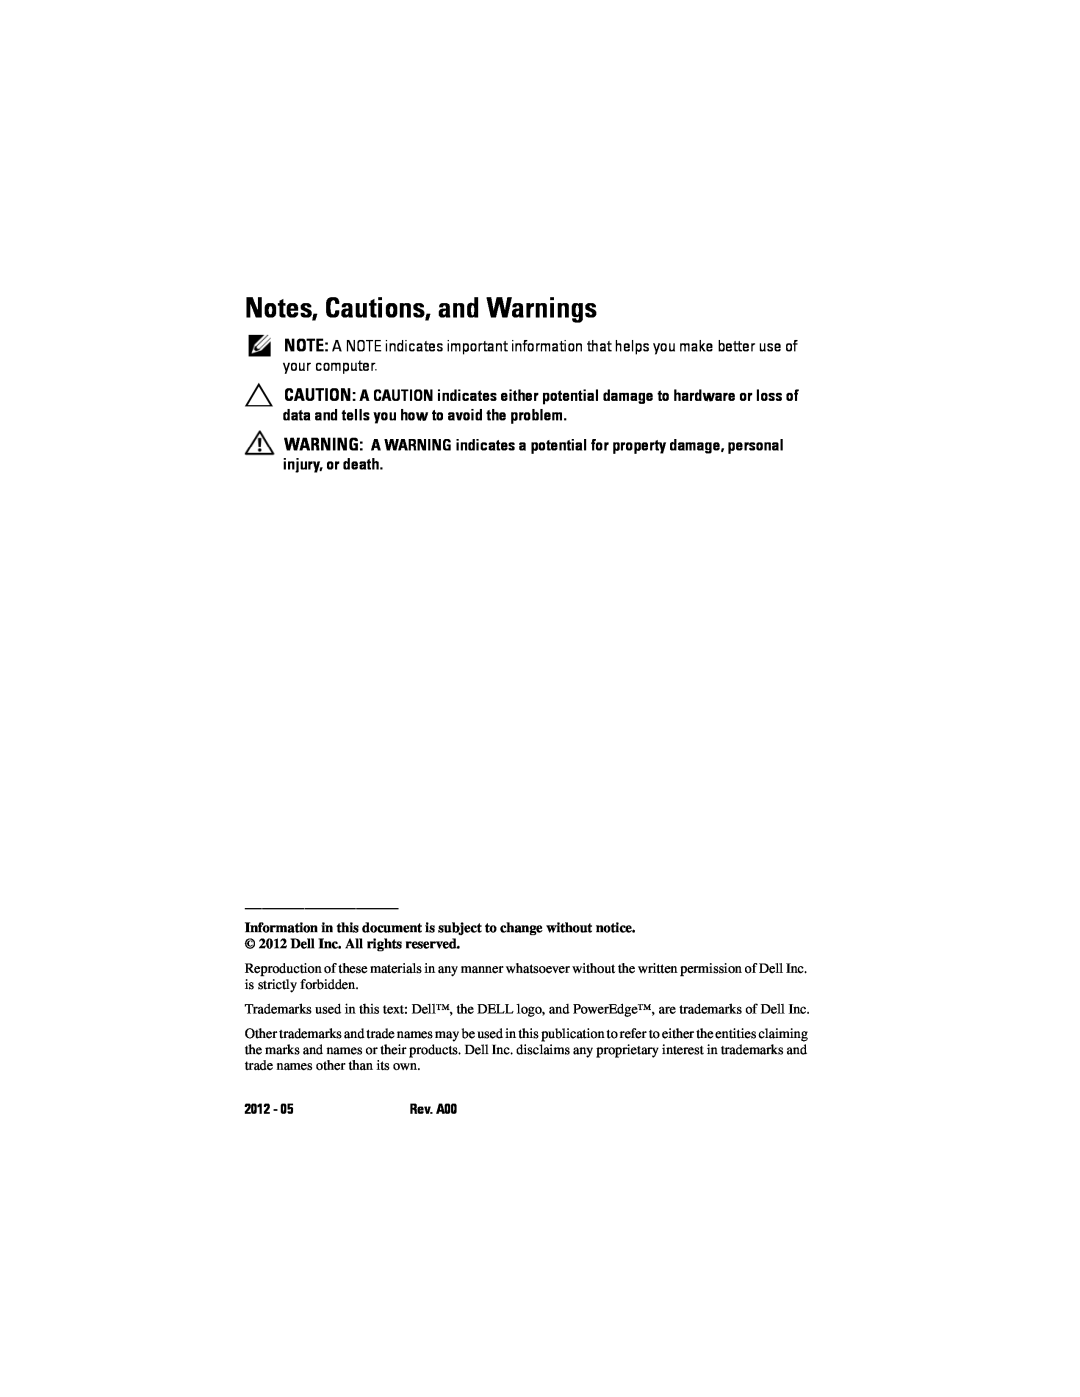 Dell R420 manual Notes, Cautions, and Warnings, 2012, Rev. A00 